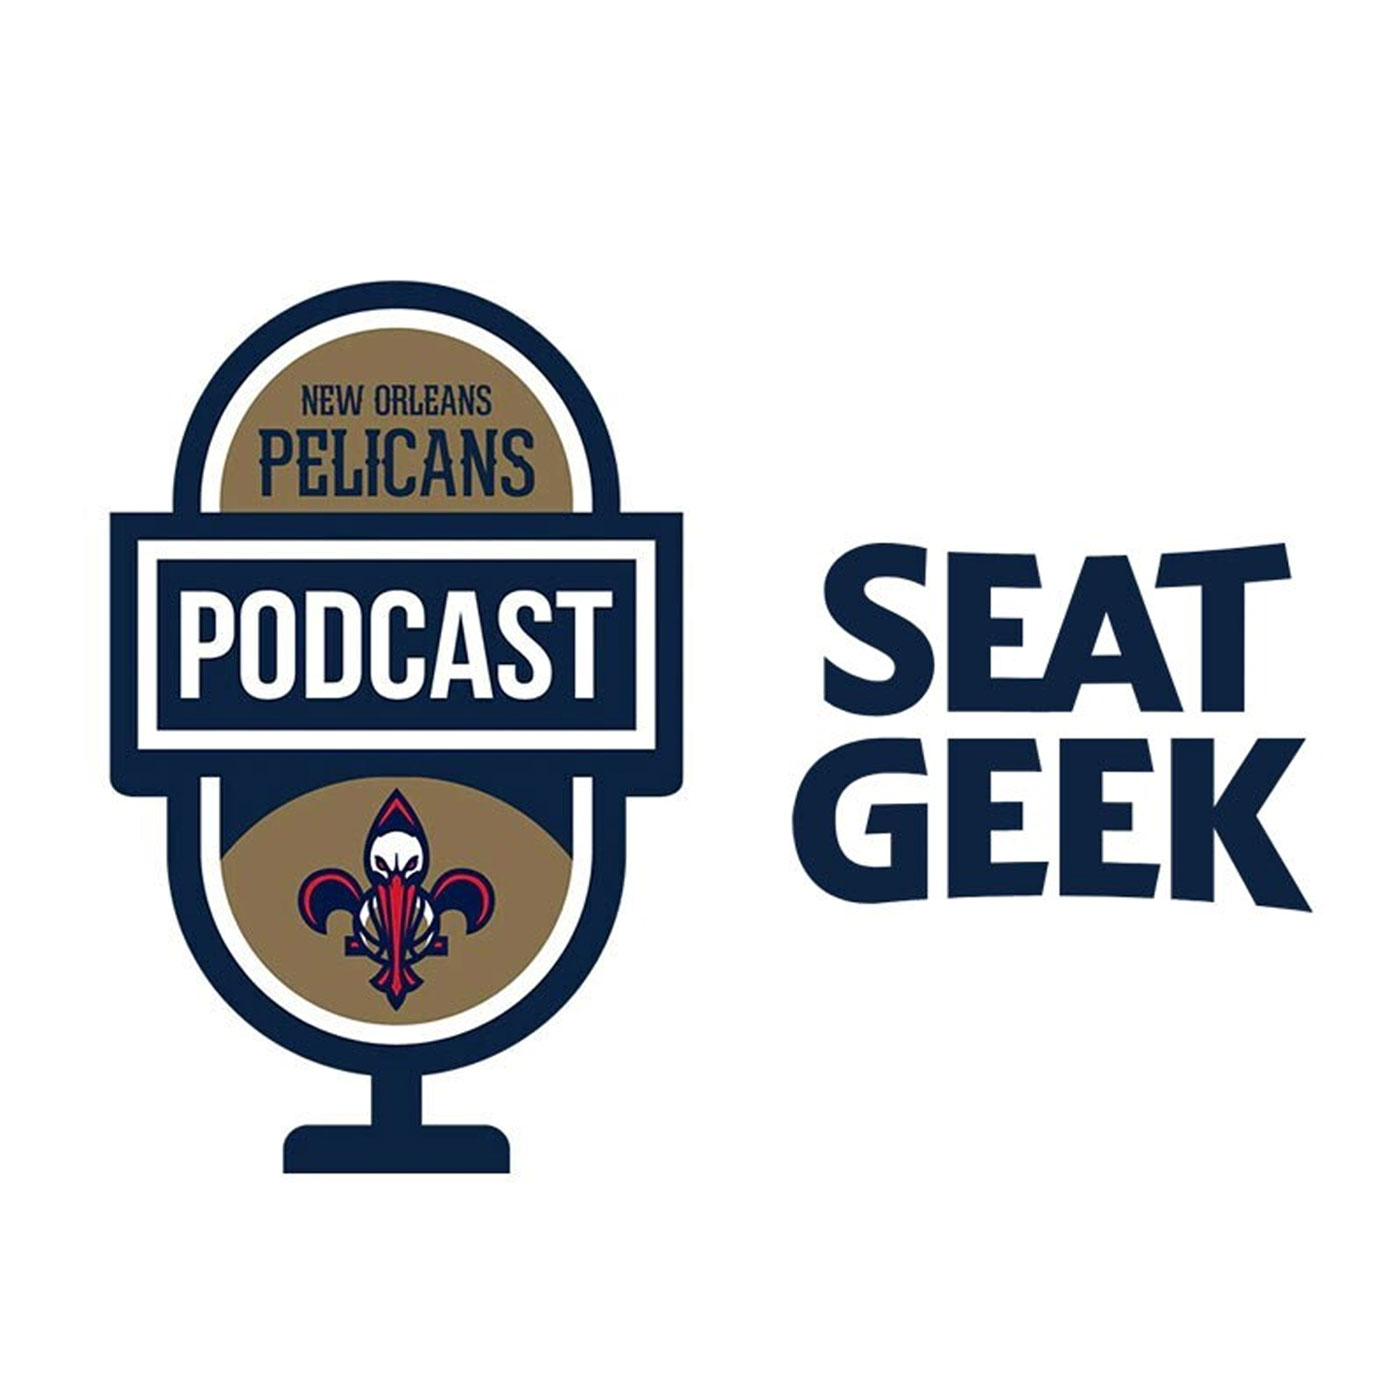 Travis Steele on the New Orleans Pelicans podcast presented by SeatGeek - April 14, 2021